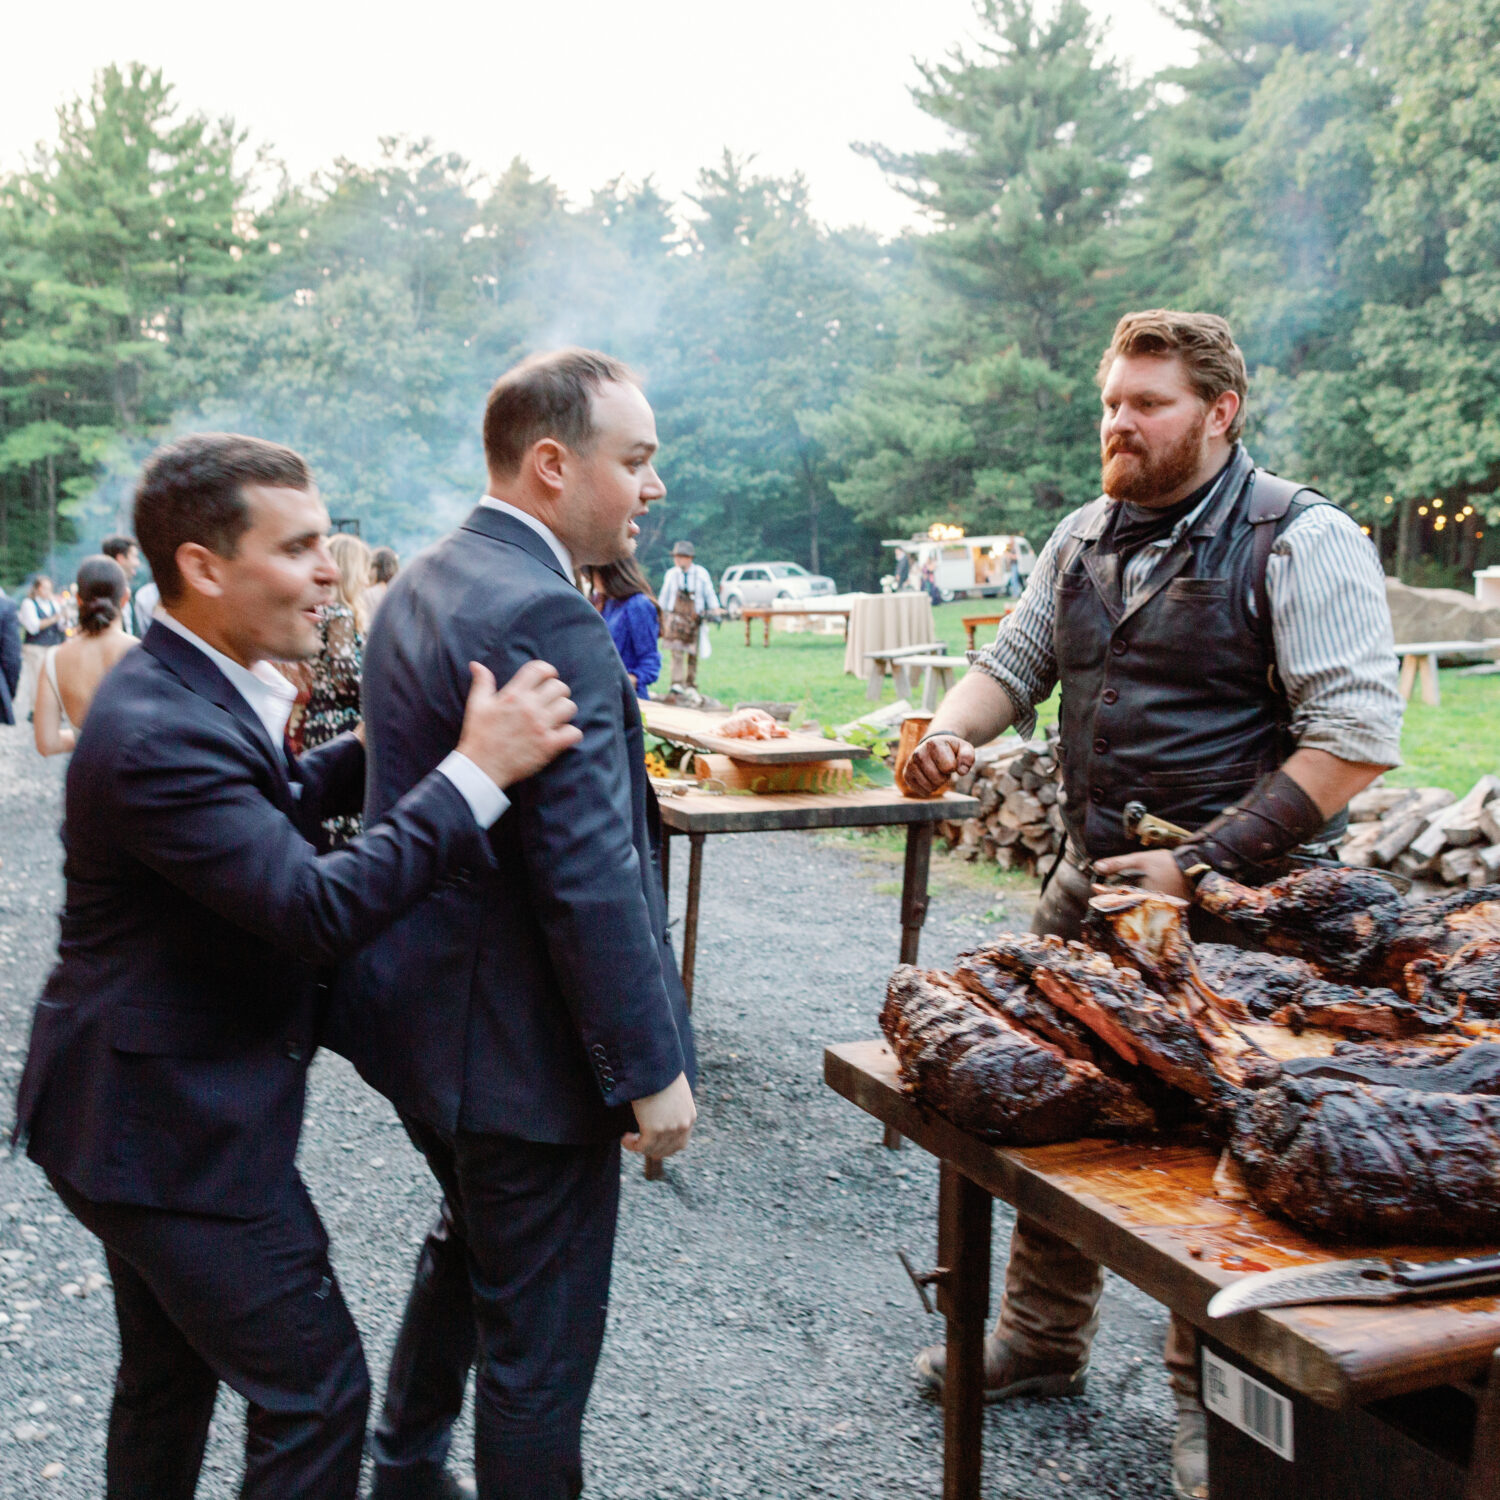 Groom is pumped up by friend as he approaches table of food catered by Heirloom Fire on wedding day at Gather Greene.